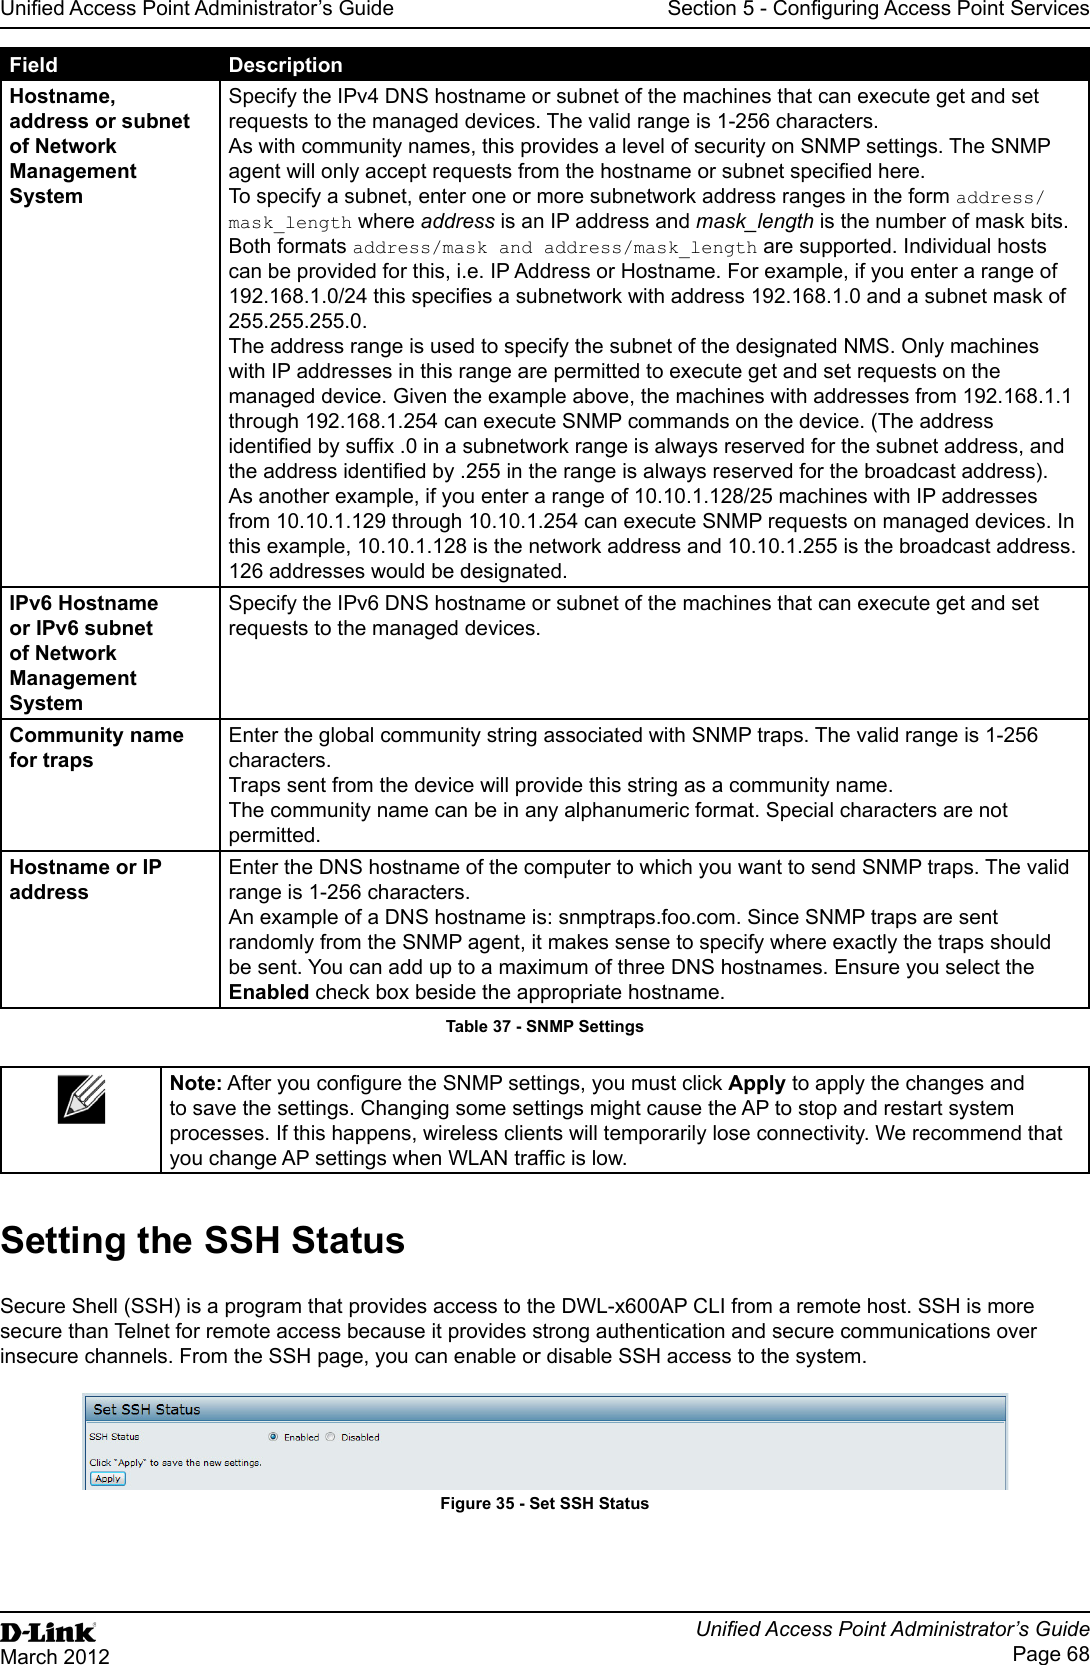 Unied Access Point Administrator’s GuideUnied Access Point Administrator’s GuidePage 68March 2012Section 5 - Conguring Access Point ServicesField DescriptionHostname, address or subnet of Network Management SystemSpecify the IPv4 DNS hostname or subnet of the machines that can execute get and set requests to the managed devices. The valid range is 1-256 characters.As with community names, this provides a level of security on SNMP settings. The SNMP agent will only accept requests from the hostname or subnet specied here.To specify a subnet, enter one or more subnetwork address ranges in the form address/mask_length where address is an IP address and mask_length is the number of mask bits. Both formats address/mask and address/mask_length are supported. Individual hosts can be provided for this, i.e. IP Address or Hostname. For example, if you enter a range of 192.168.1.0/24 this species a subnetwork with address 192.168.1.0 and a subnet mask of 255.255.255.0. The address range is used to specify the subnet of the designated NMS. Only machines with IP addresses in this range are permitted to execute get and set requests on the managed device. Given the example above, the machines with addresses from 192.168.1.1 through 192.168.1.254 can execute SNMP commands on the device. (The address identied by sufx .0 in a subnetwork range is always reserved for the subnet address, and the address identied by .255 in the range is always reserved for the broadcast address). As another example, if you enter a range of 10.10.1.128/25 machines with IP addresses from 10.10.1.129 through 10.10.1.254 can execute SNMP requests on managed devices. In this example, 10.10.1.128 is the network address and 10.10.1.255 is the broadcast address. 126 addresses would be designated.IPv6 Hostname or IPv6 subnet of Network Management SystemSpecify the IPv6 DNS hostname or subnet of the machines that can execute get and set requests to the managed devices.Community name for trapsEnter the global community string associated with SNMP traps. The valid range is 1-256 characters.Traps sent from the device will provide this string as a community name.The community name can be in any alphanumeric format. Special characters are not permitted.Hostname or IP addressEnter the DNS hostname of the computer to which you want to send SNMP traps. The valid range is 1-256 characters.An example of a DNS hostname is: snmptraps.foo.com. Since SNMP traps are sent randomly from the SNMP agent, it makes sense to specify where exactly the traps should be sent. You can add up to a maximum of three DNS hostnames. Ensure you select the Enabled check box beside the appropriate hostname.Table 37 - SNMP SettingsNote: After you congure the SNMP settings, you must click Apply to apply the changes and to save the settings. Changing some settings might cause the AP to stop and restart system processes. If this happens, wireless clients will temporarily lose connectivity. We recommend that you change AP settings when WLAN trafc is low.Setting the SSH StatusSecure Shell (SSH) is a program that provides access to the DWL-x600AP CLI from a remote host. SSH is more secure than Telnet for remote access because it provides strong authentication and secure communications over insecure channels. From the SSH page, you can enable or disable SSH access to the system. Figure 35 - Set SSH Status